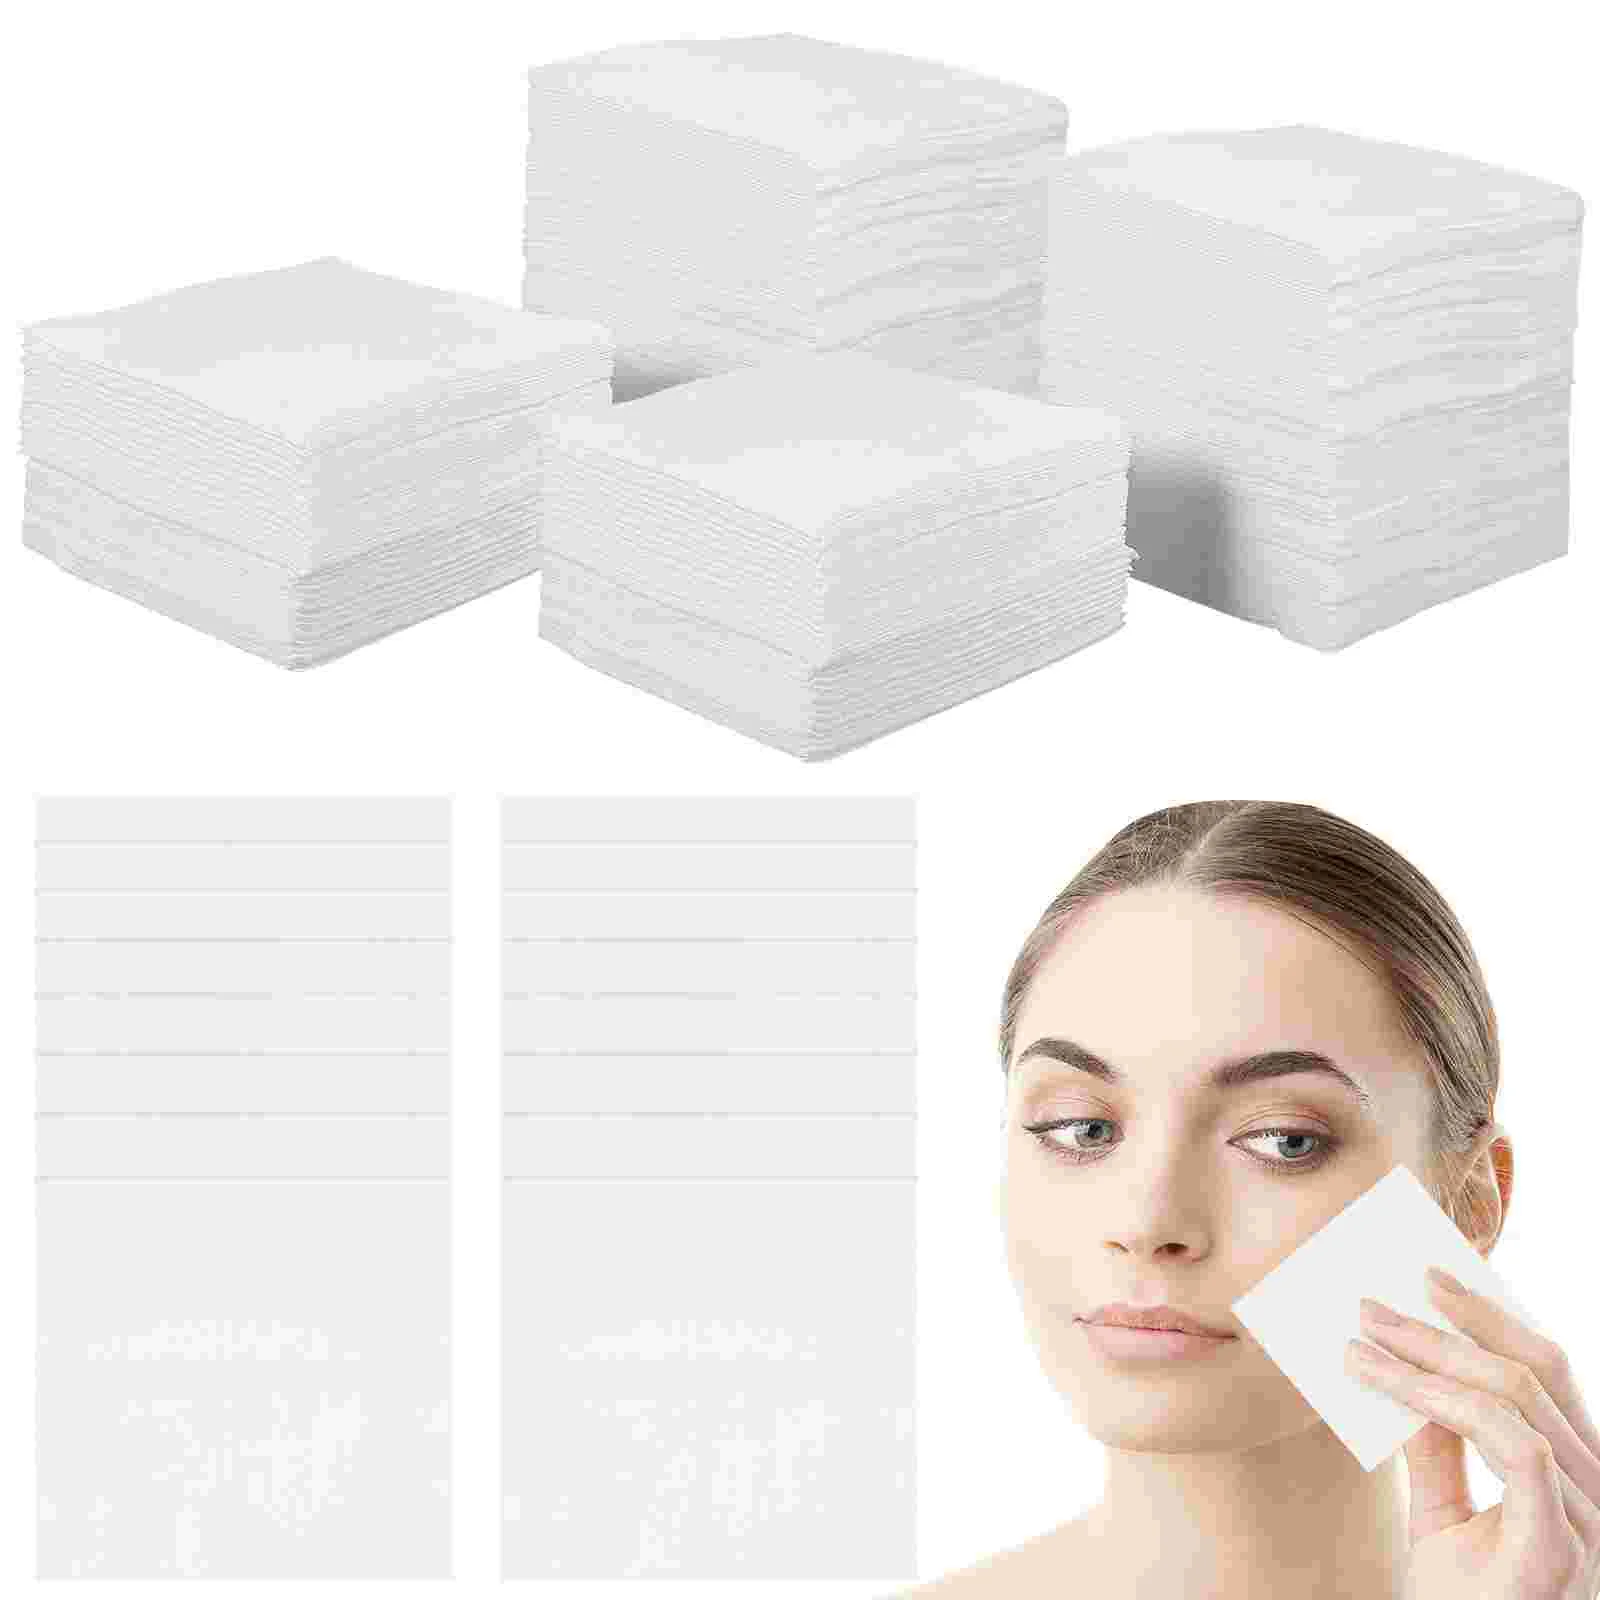 

200 Pcs Non-woven Fabric Makeup Remover Pads Ultrathin Absorbent Disposable Pads for Facial Clean Nail Polish Medical Care